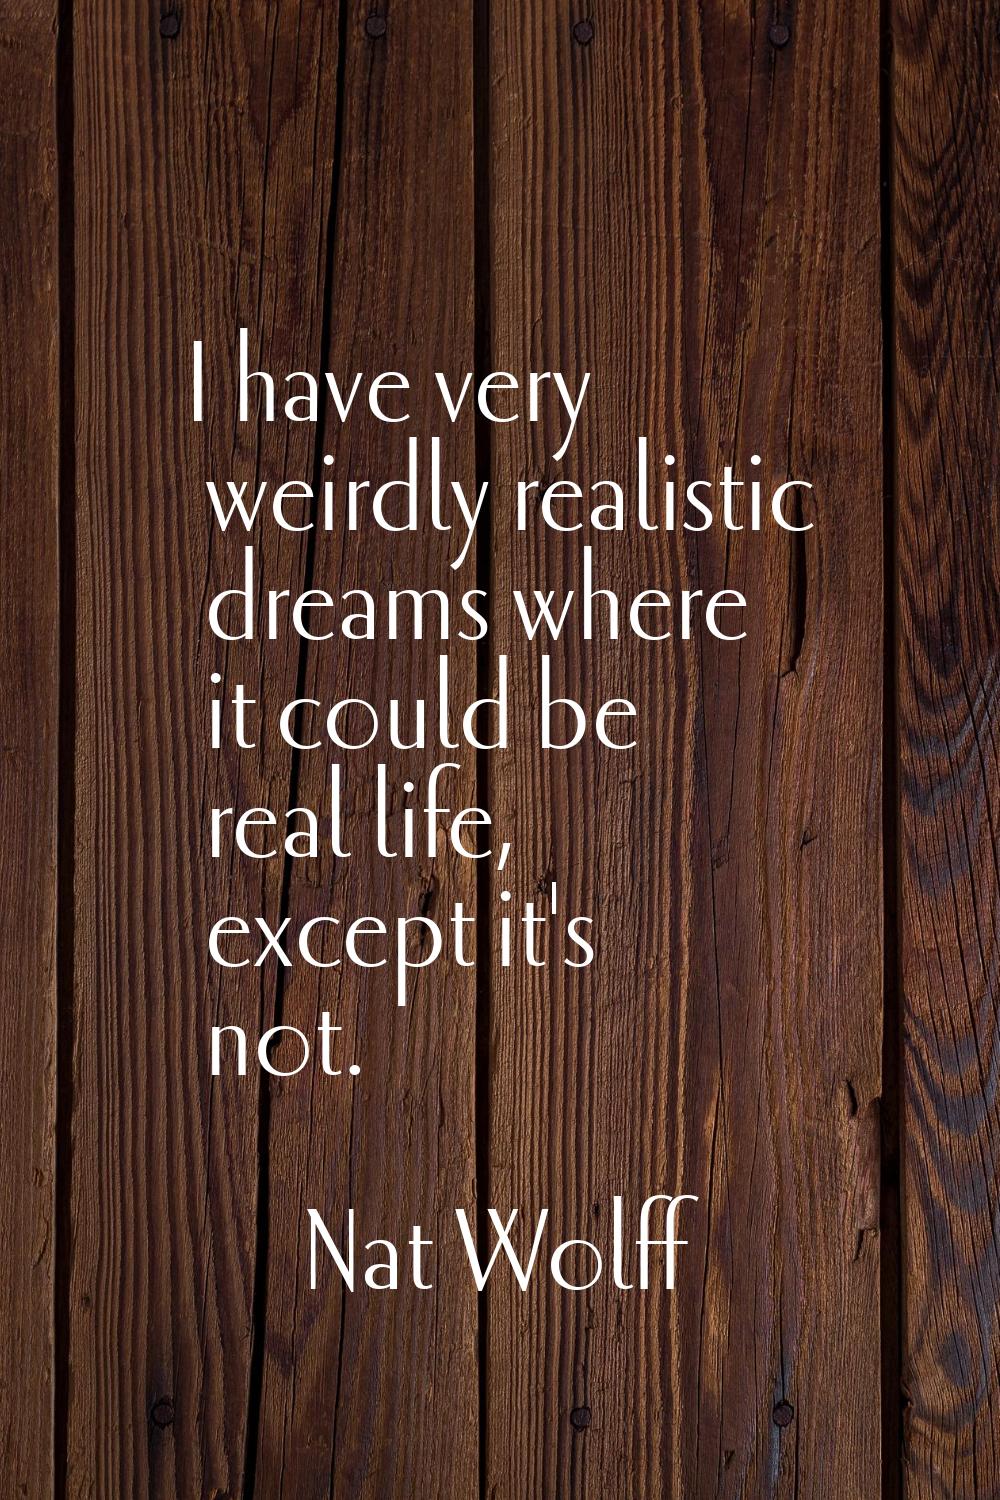 I have very weirdly realistic dreams where it could be real life, except it's not.